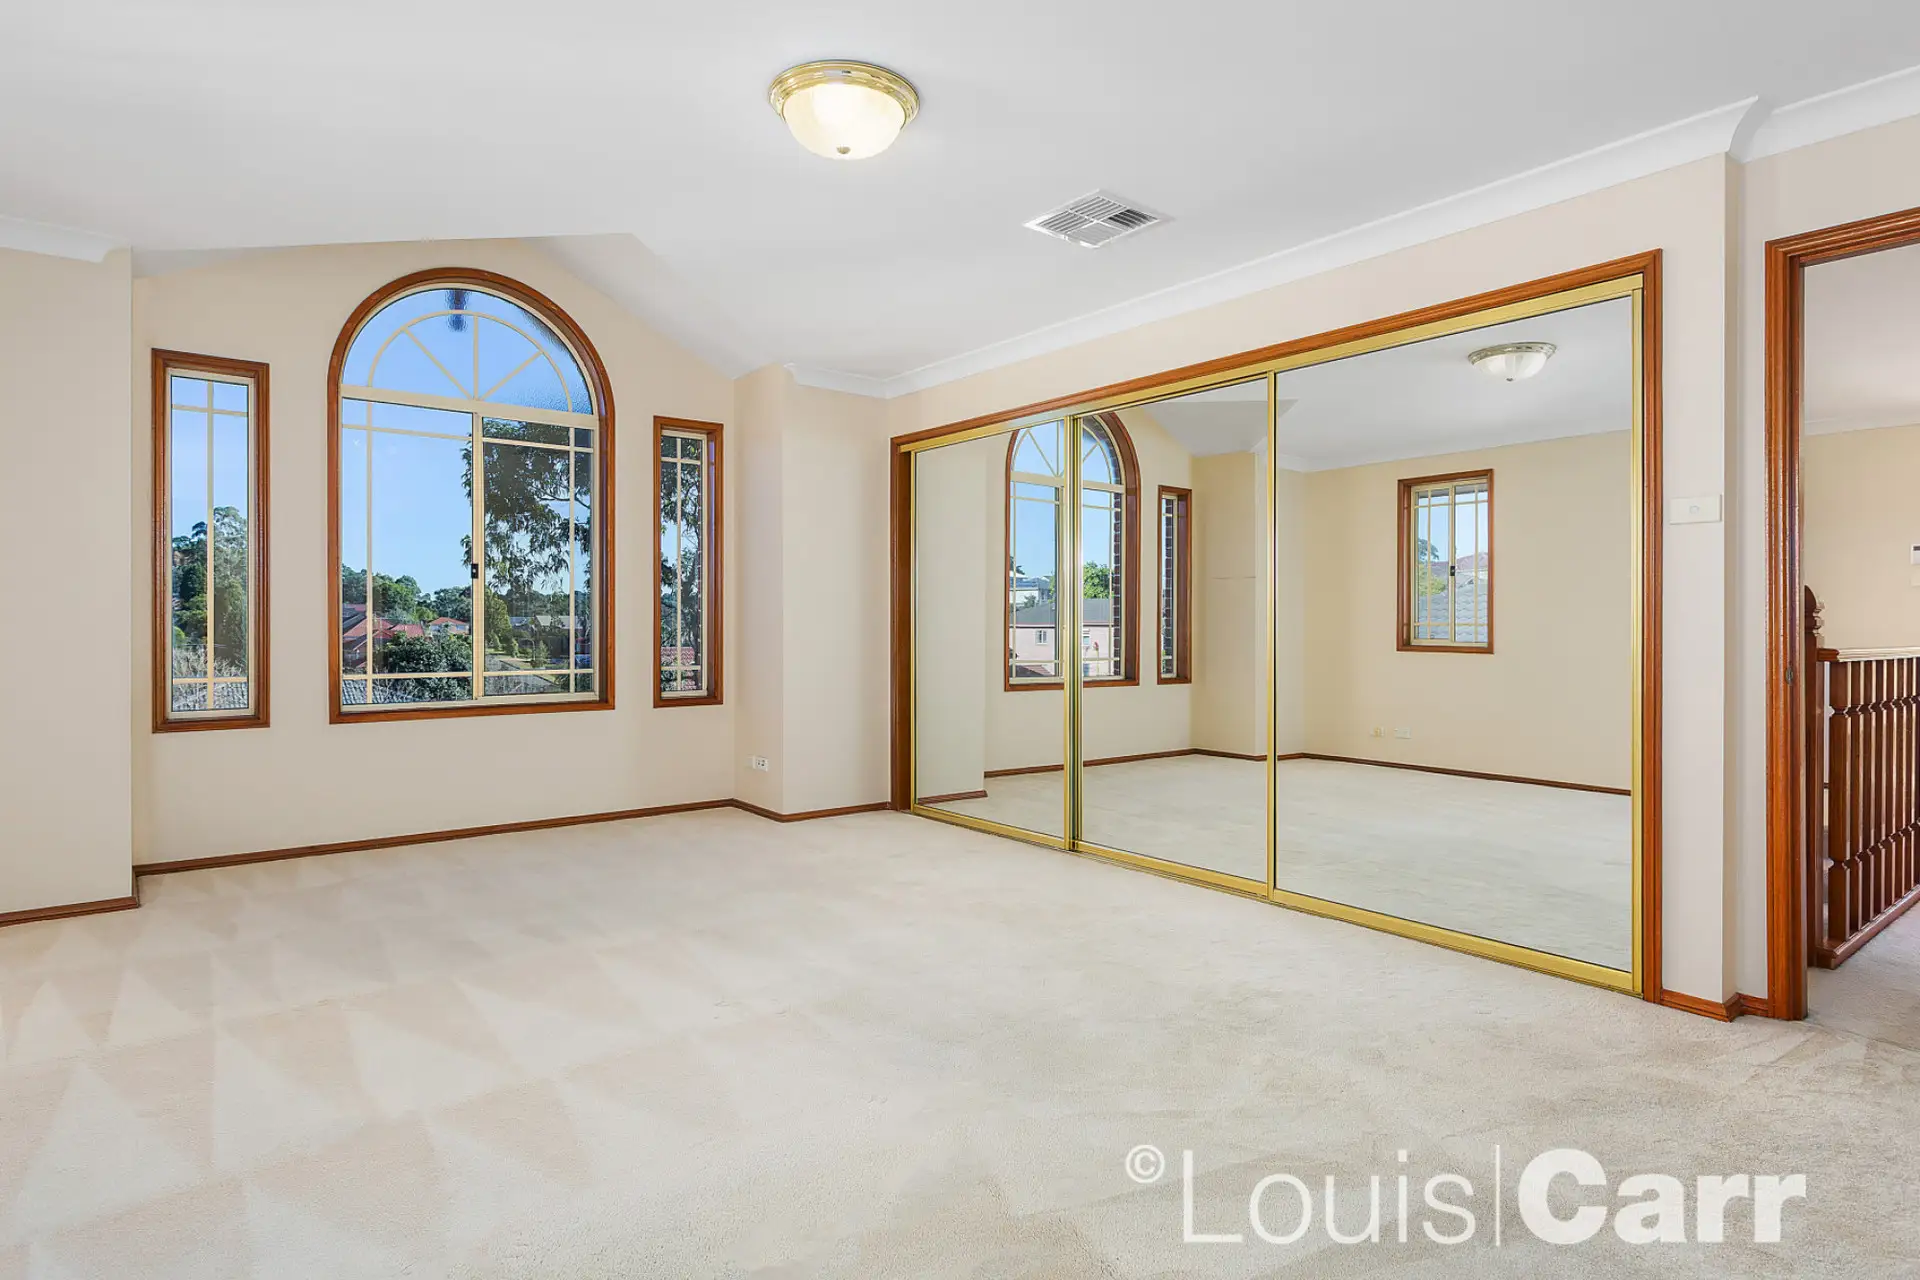 Photo #6: 9 Parkwood Close, Castle Hill - Sold by Louis Carr Real Estate